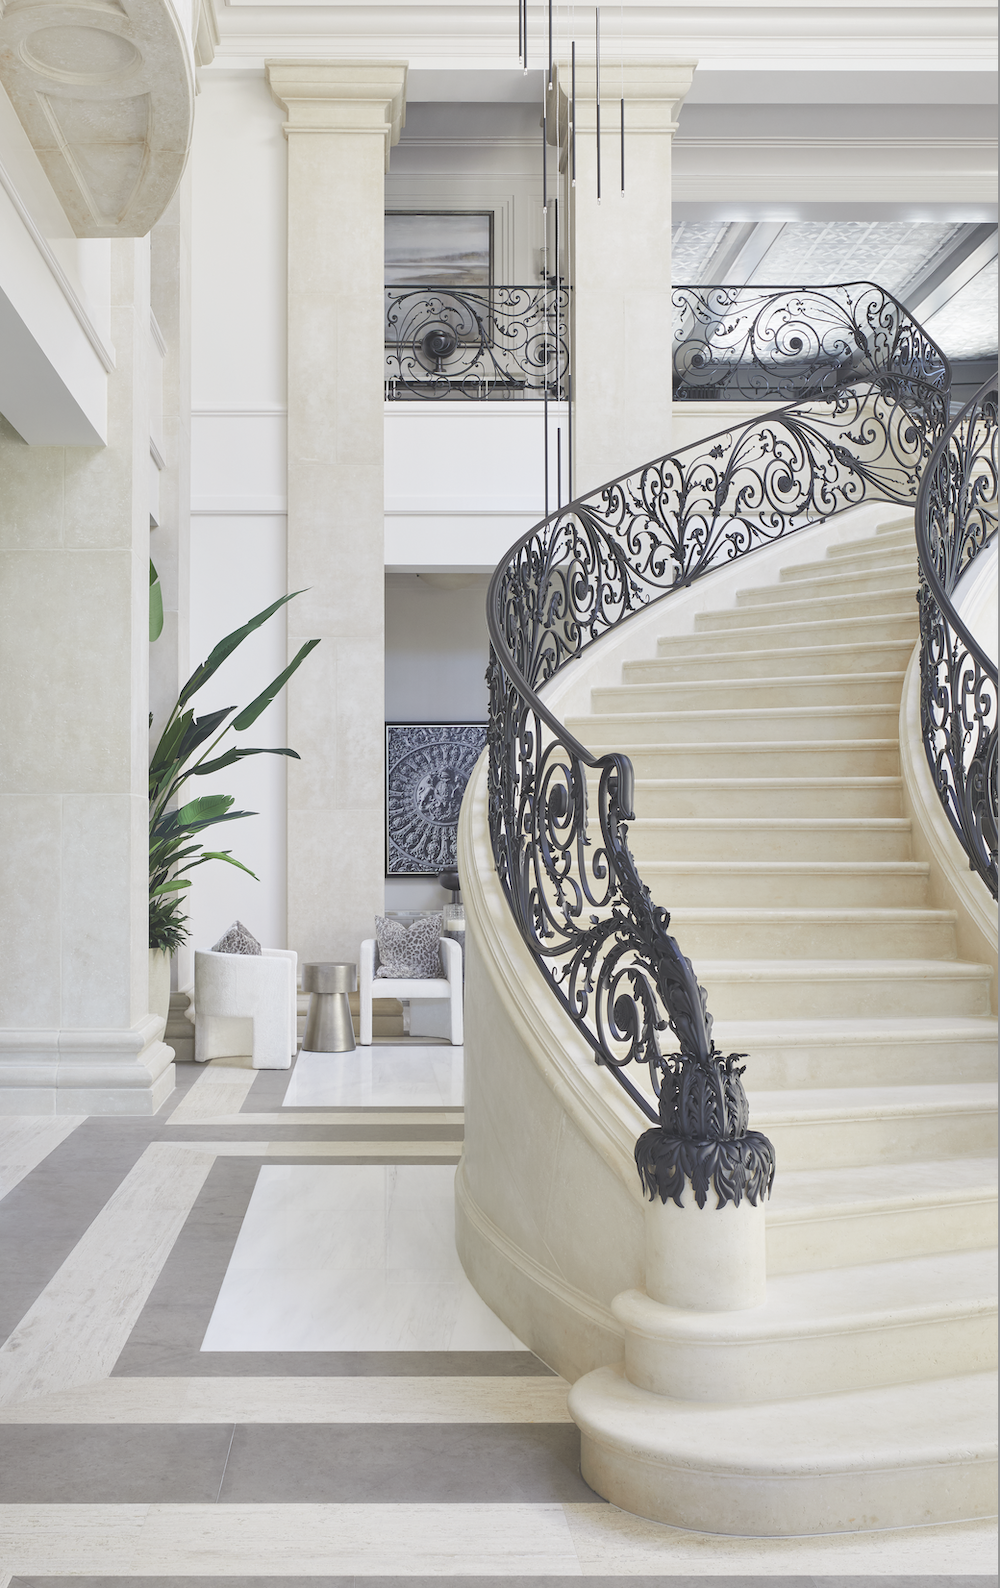 François & Co. Stonework in grand foyer with circular staircase with custom metalwork